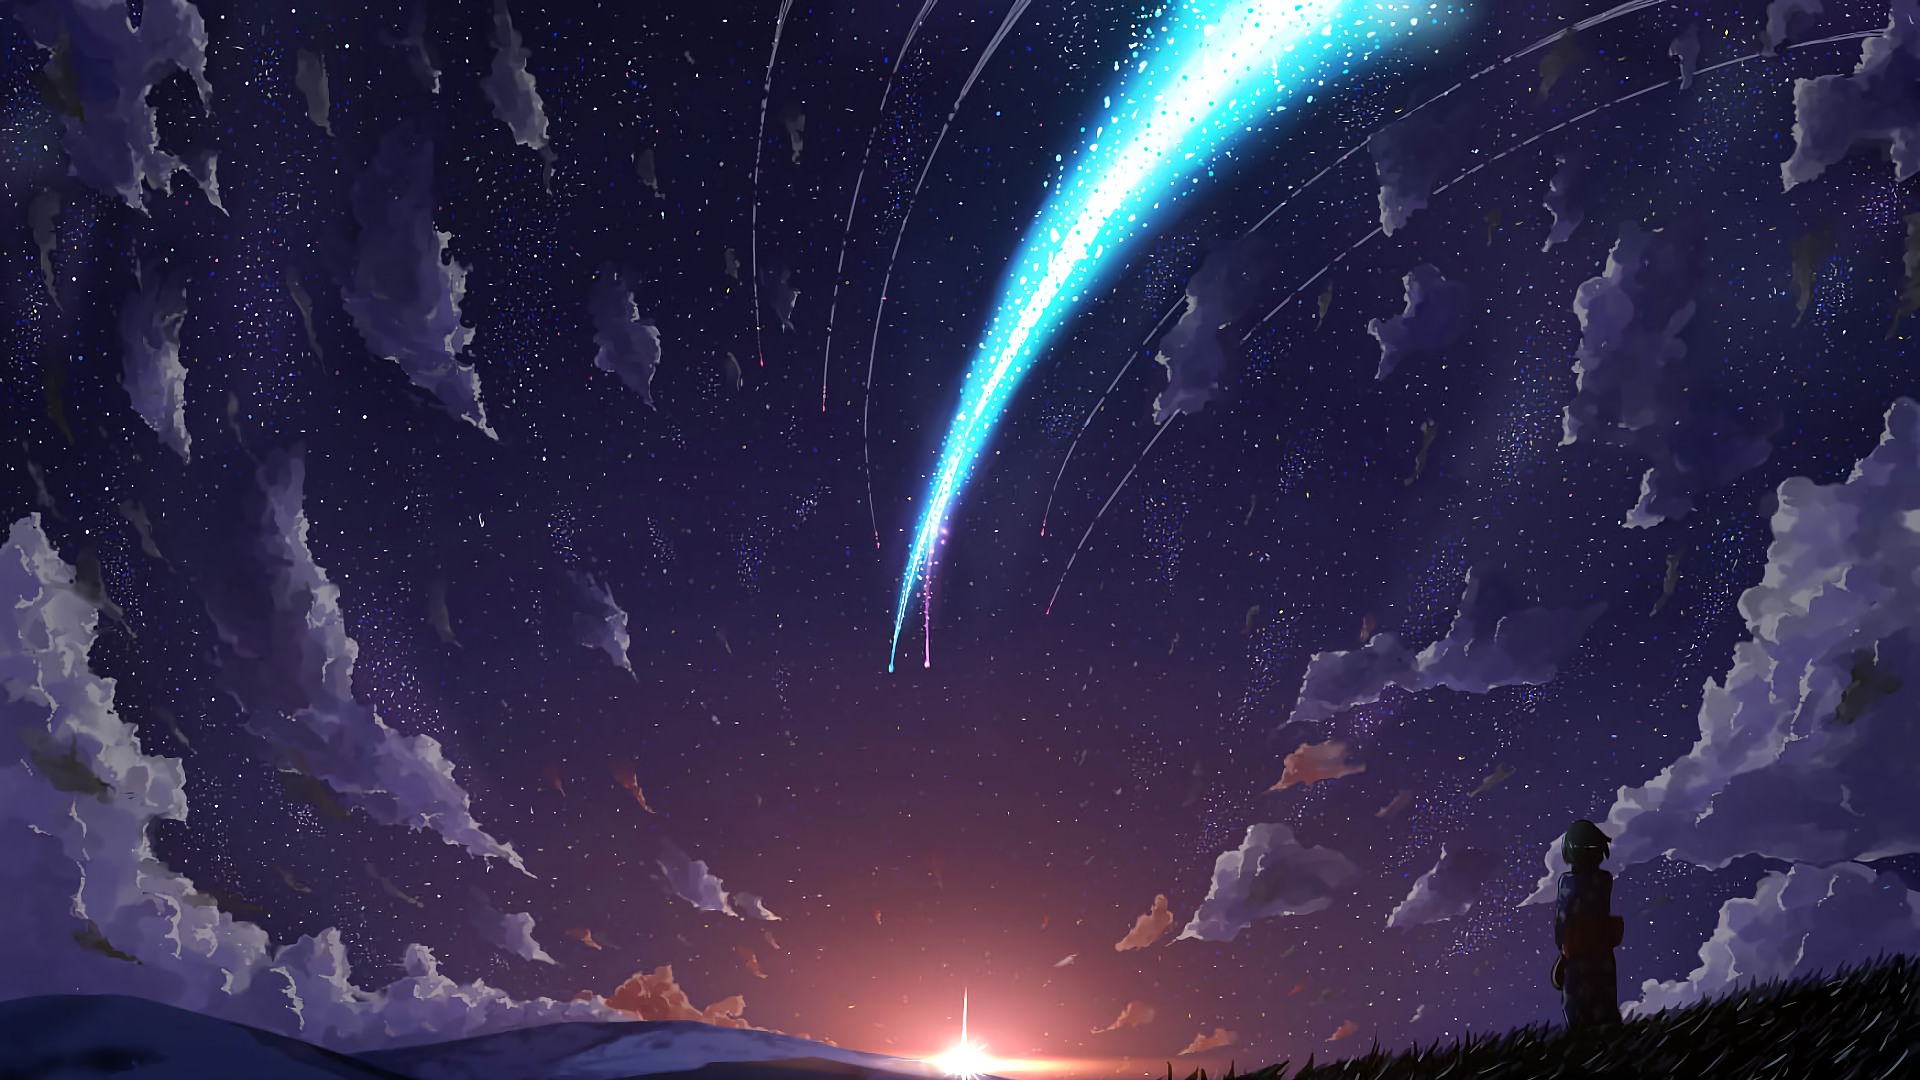 Your Name 4K Wallpaper